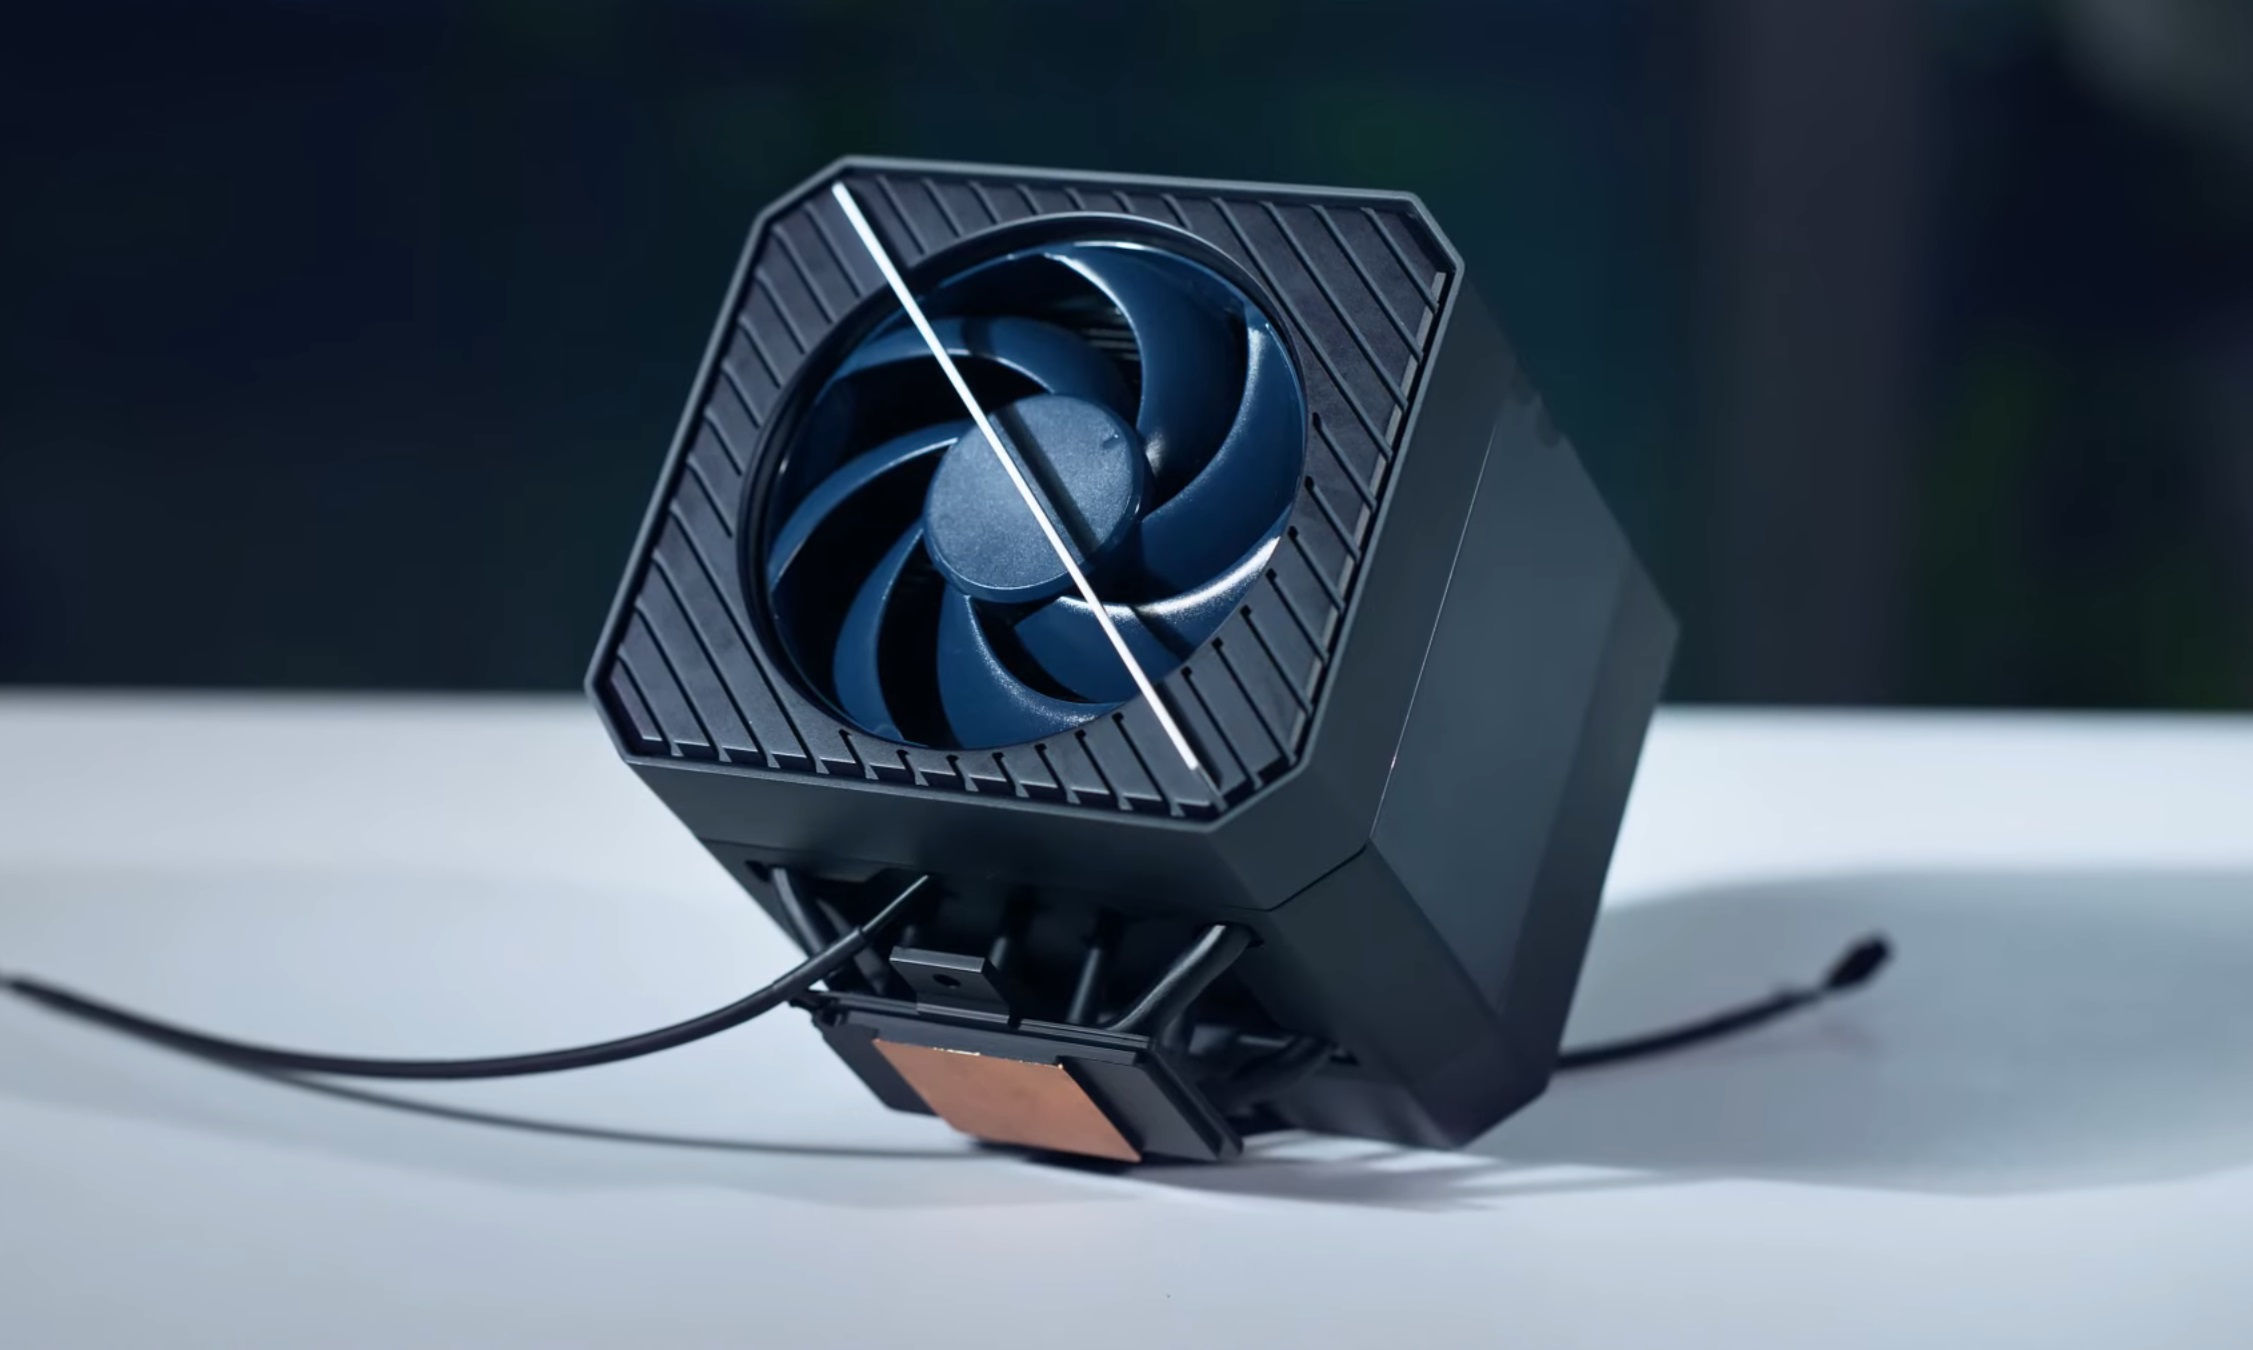 The new king of Air coolers? Cooler Master reveals their V8 3DVC with 3D Vapour Chamber tech